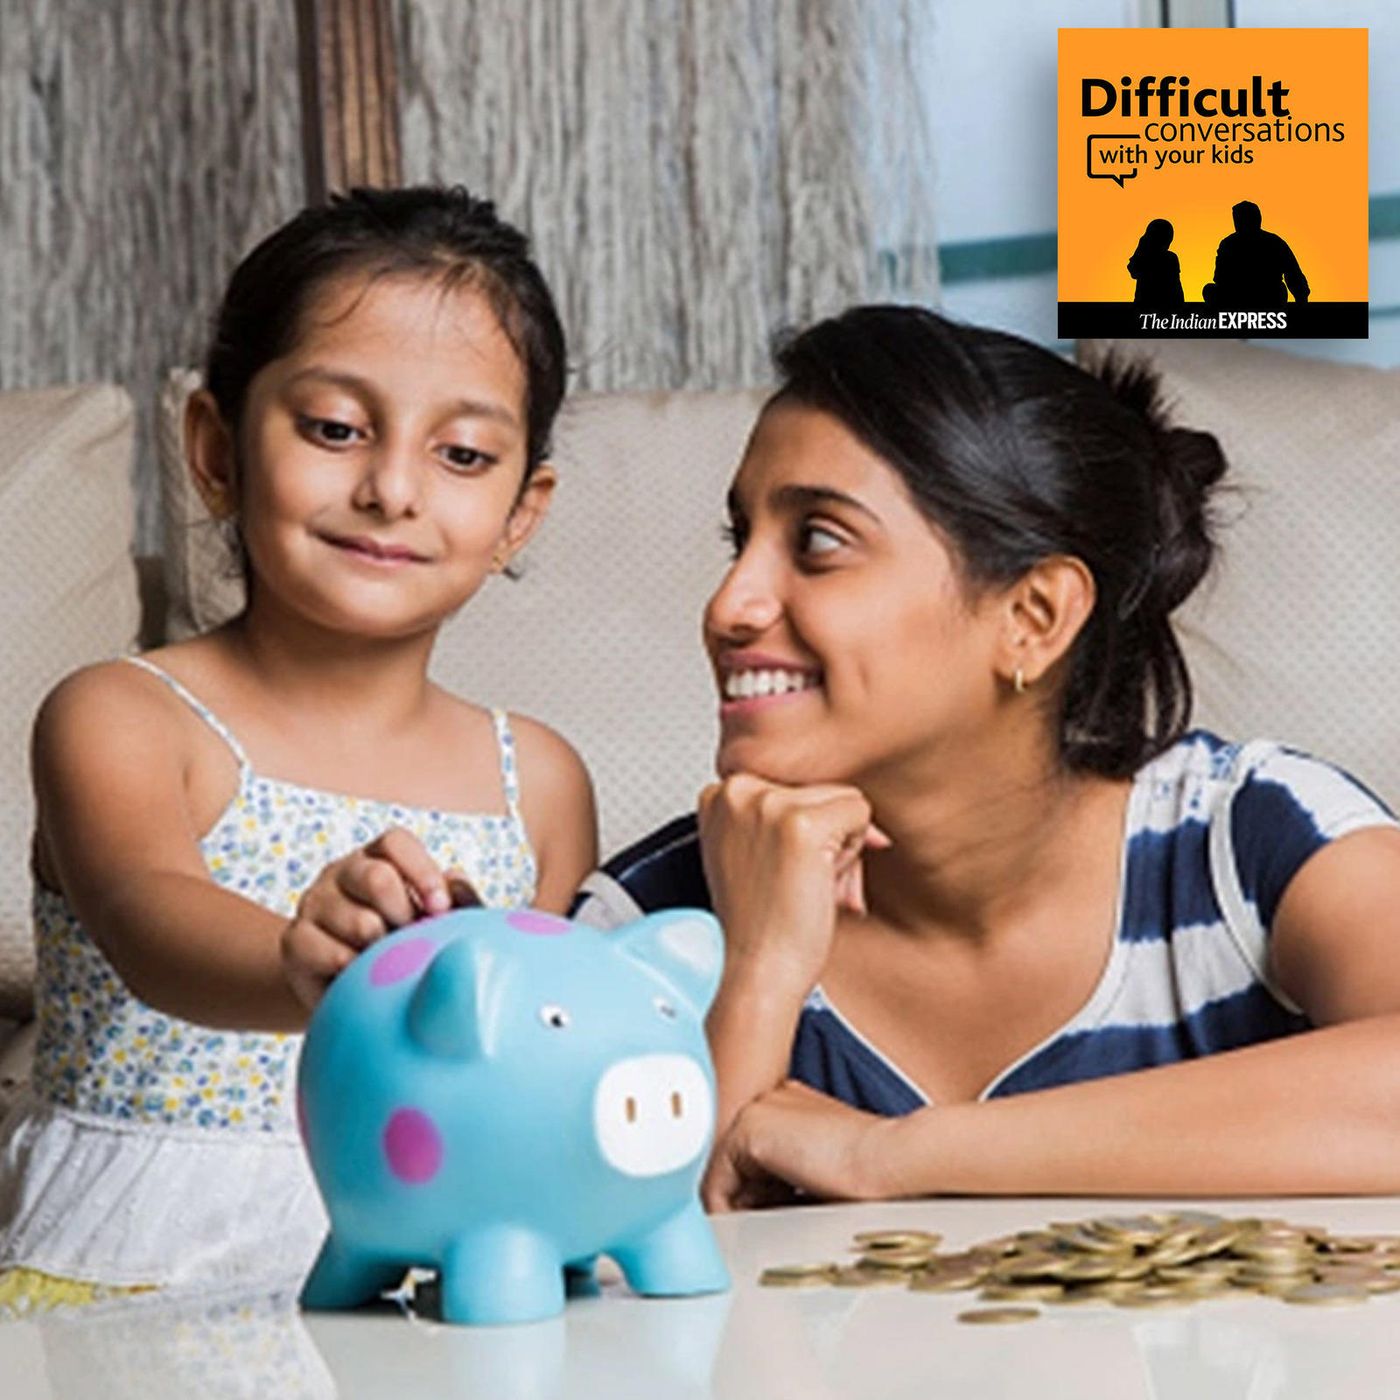 18: How to discuss money and savings with your child